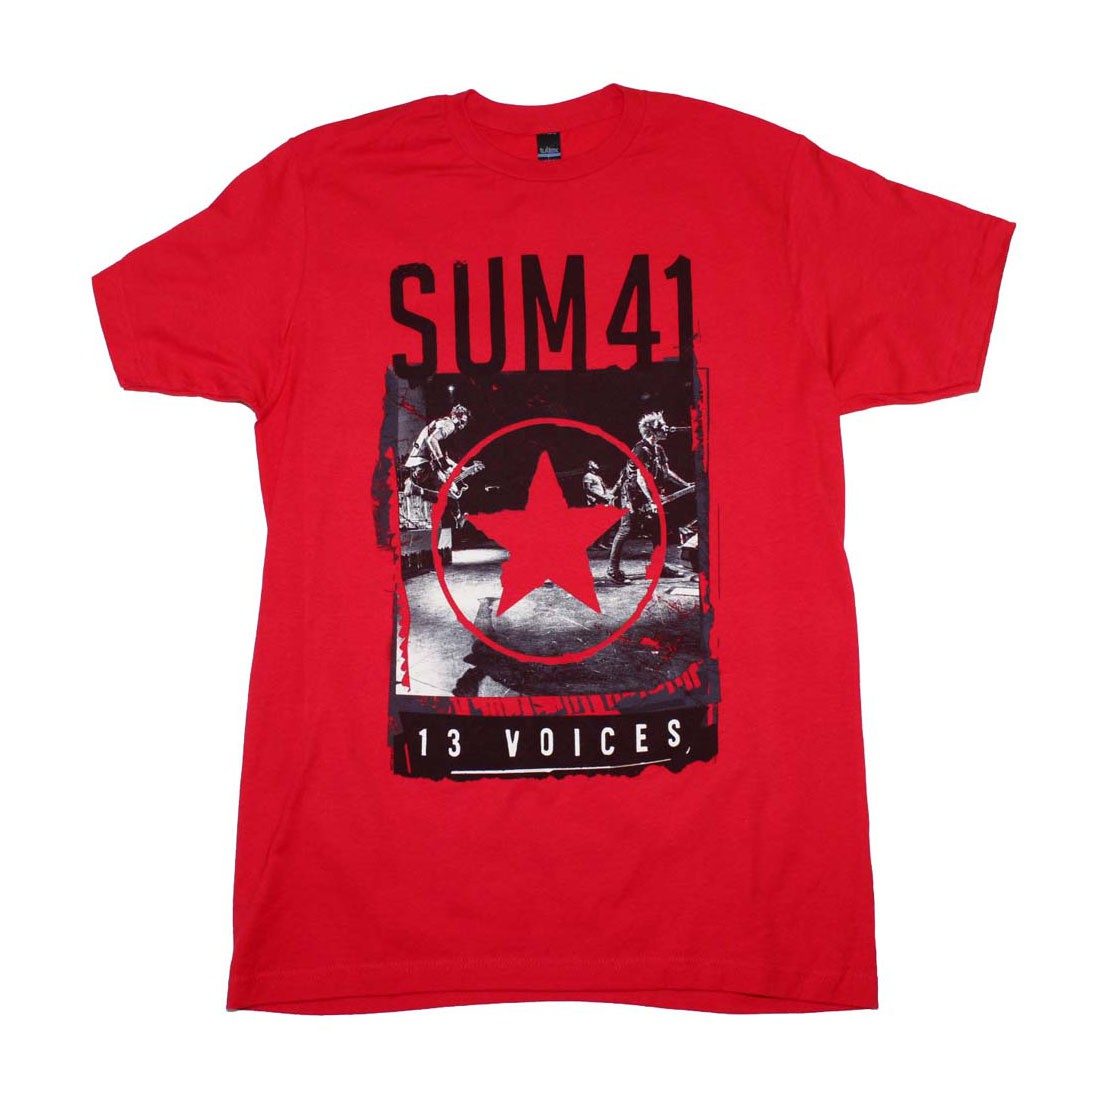 Sum 41 Red Star 13 Voices T-Shirt